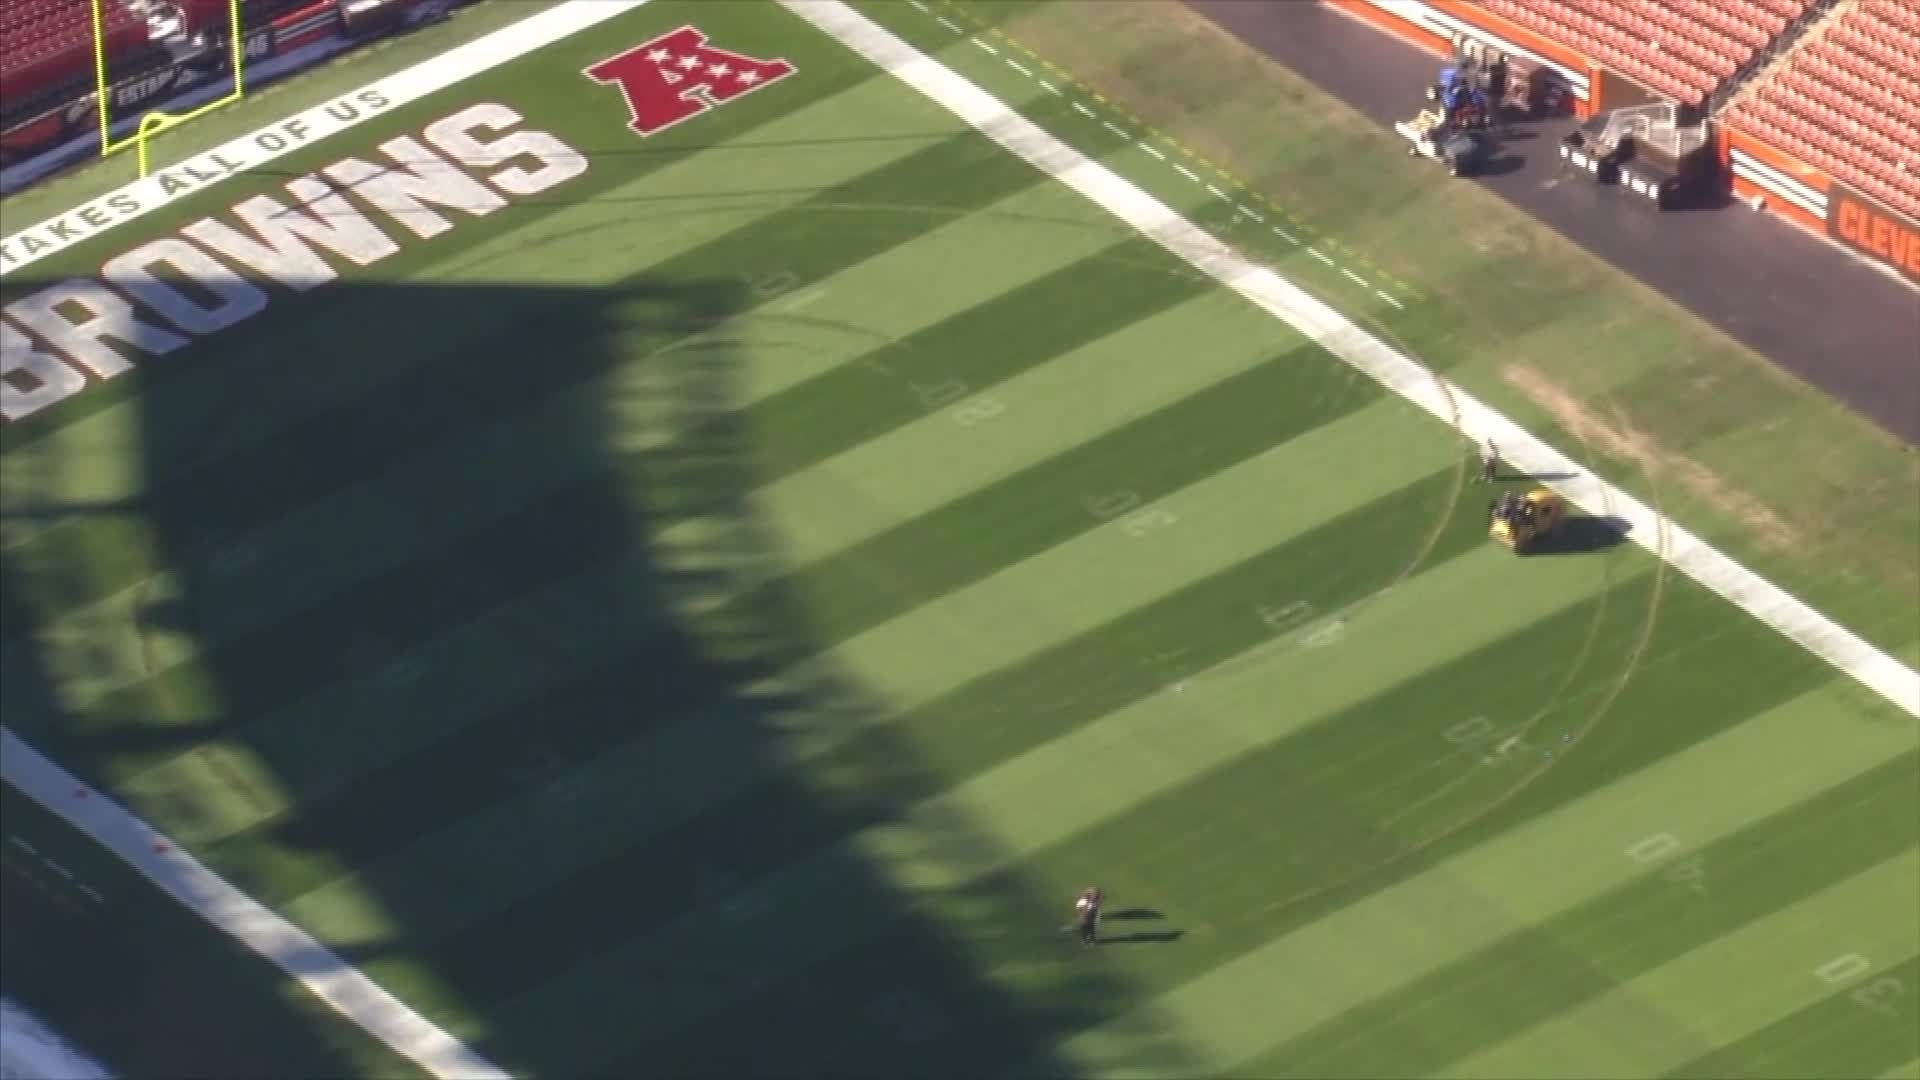 Vandals broke into Cleveland's FirstEnergy Stadium and damaged the field